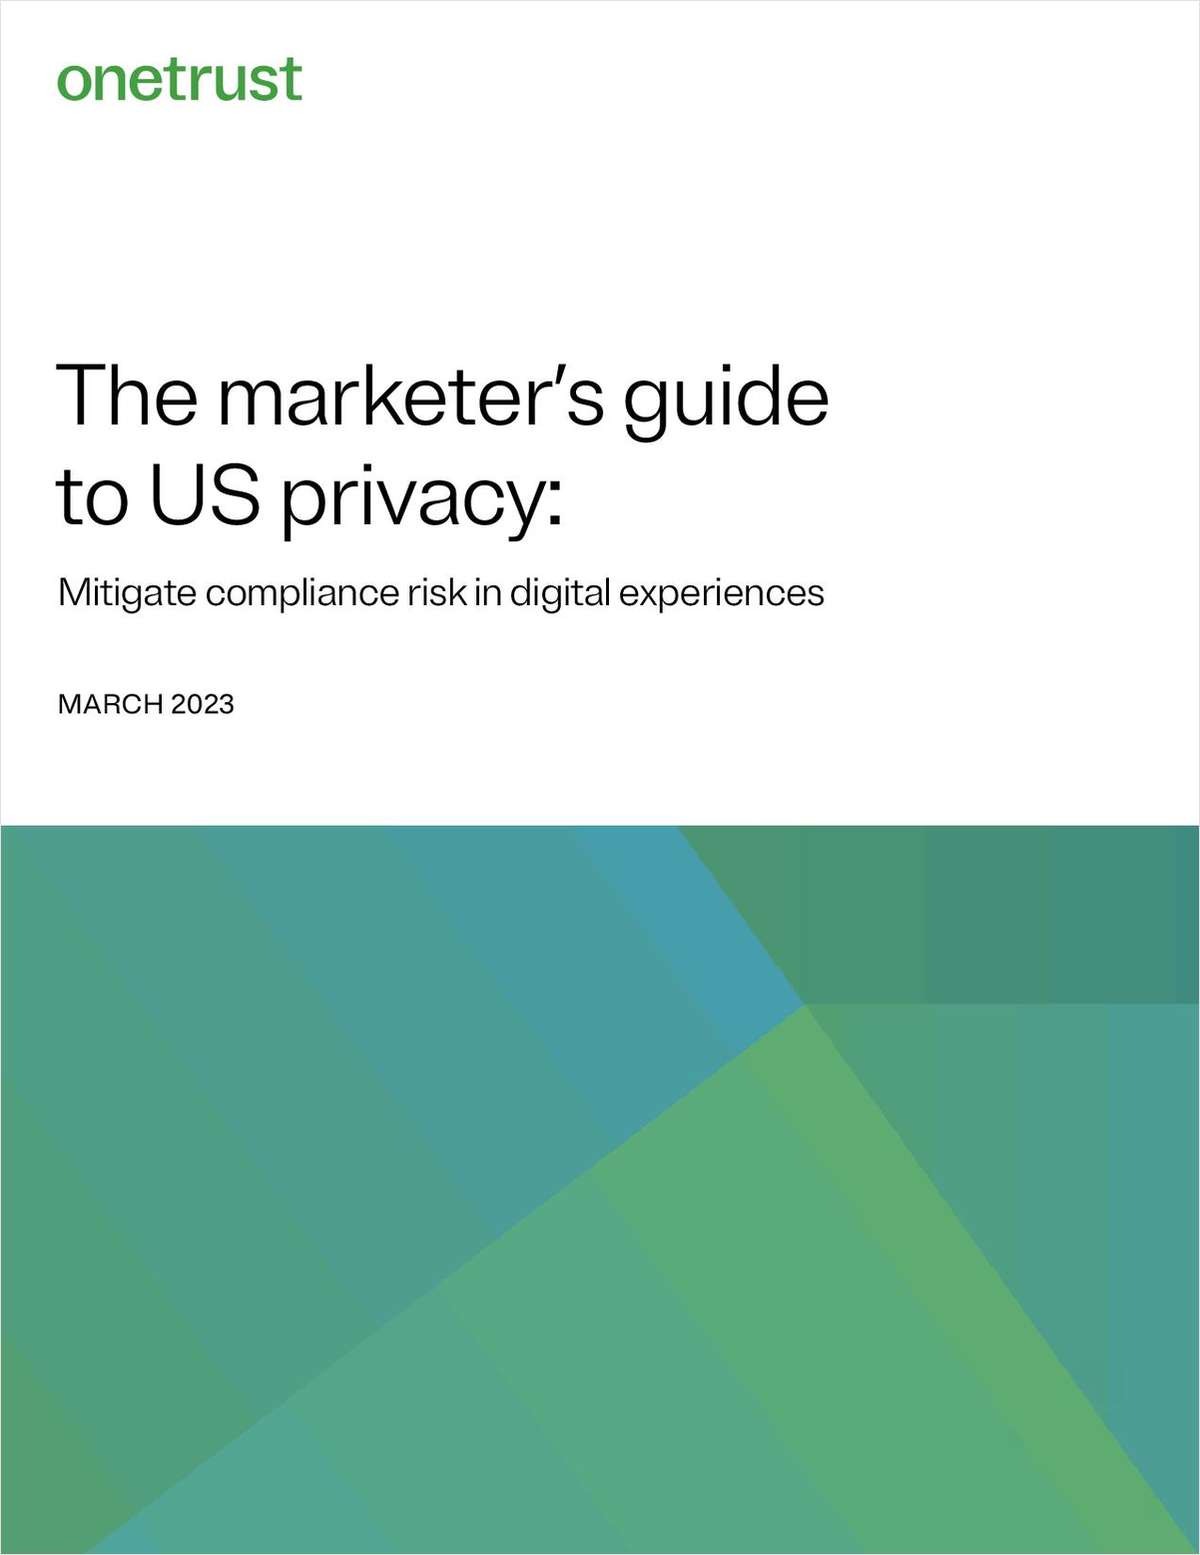 The Marketer's Guide to US Privacy